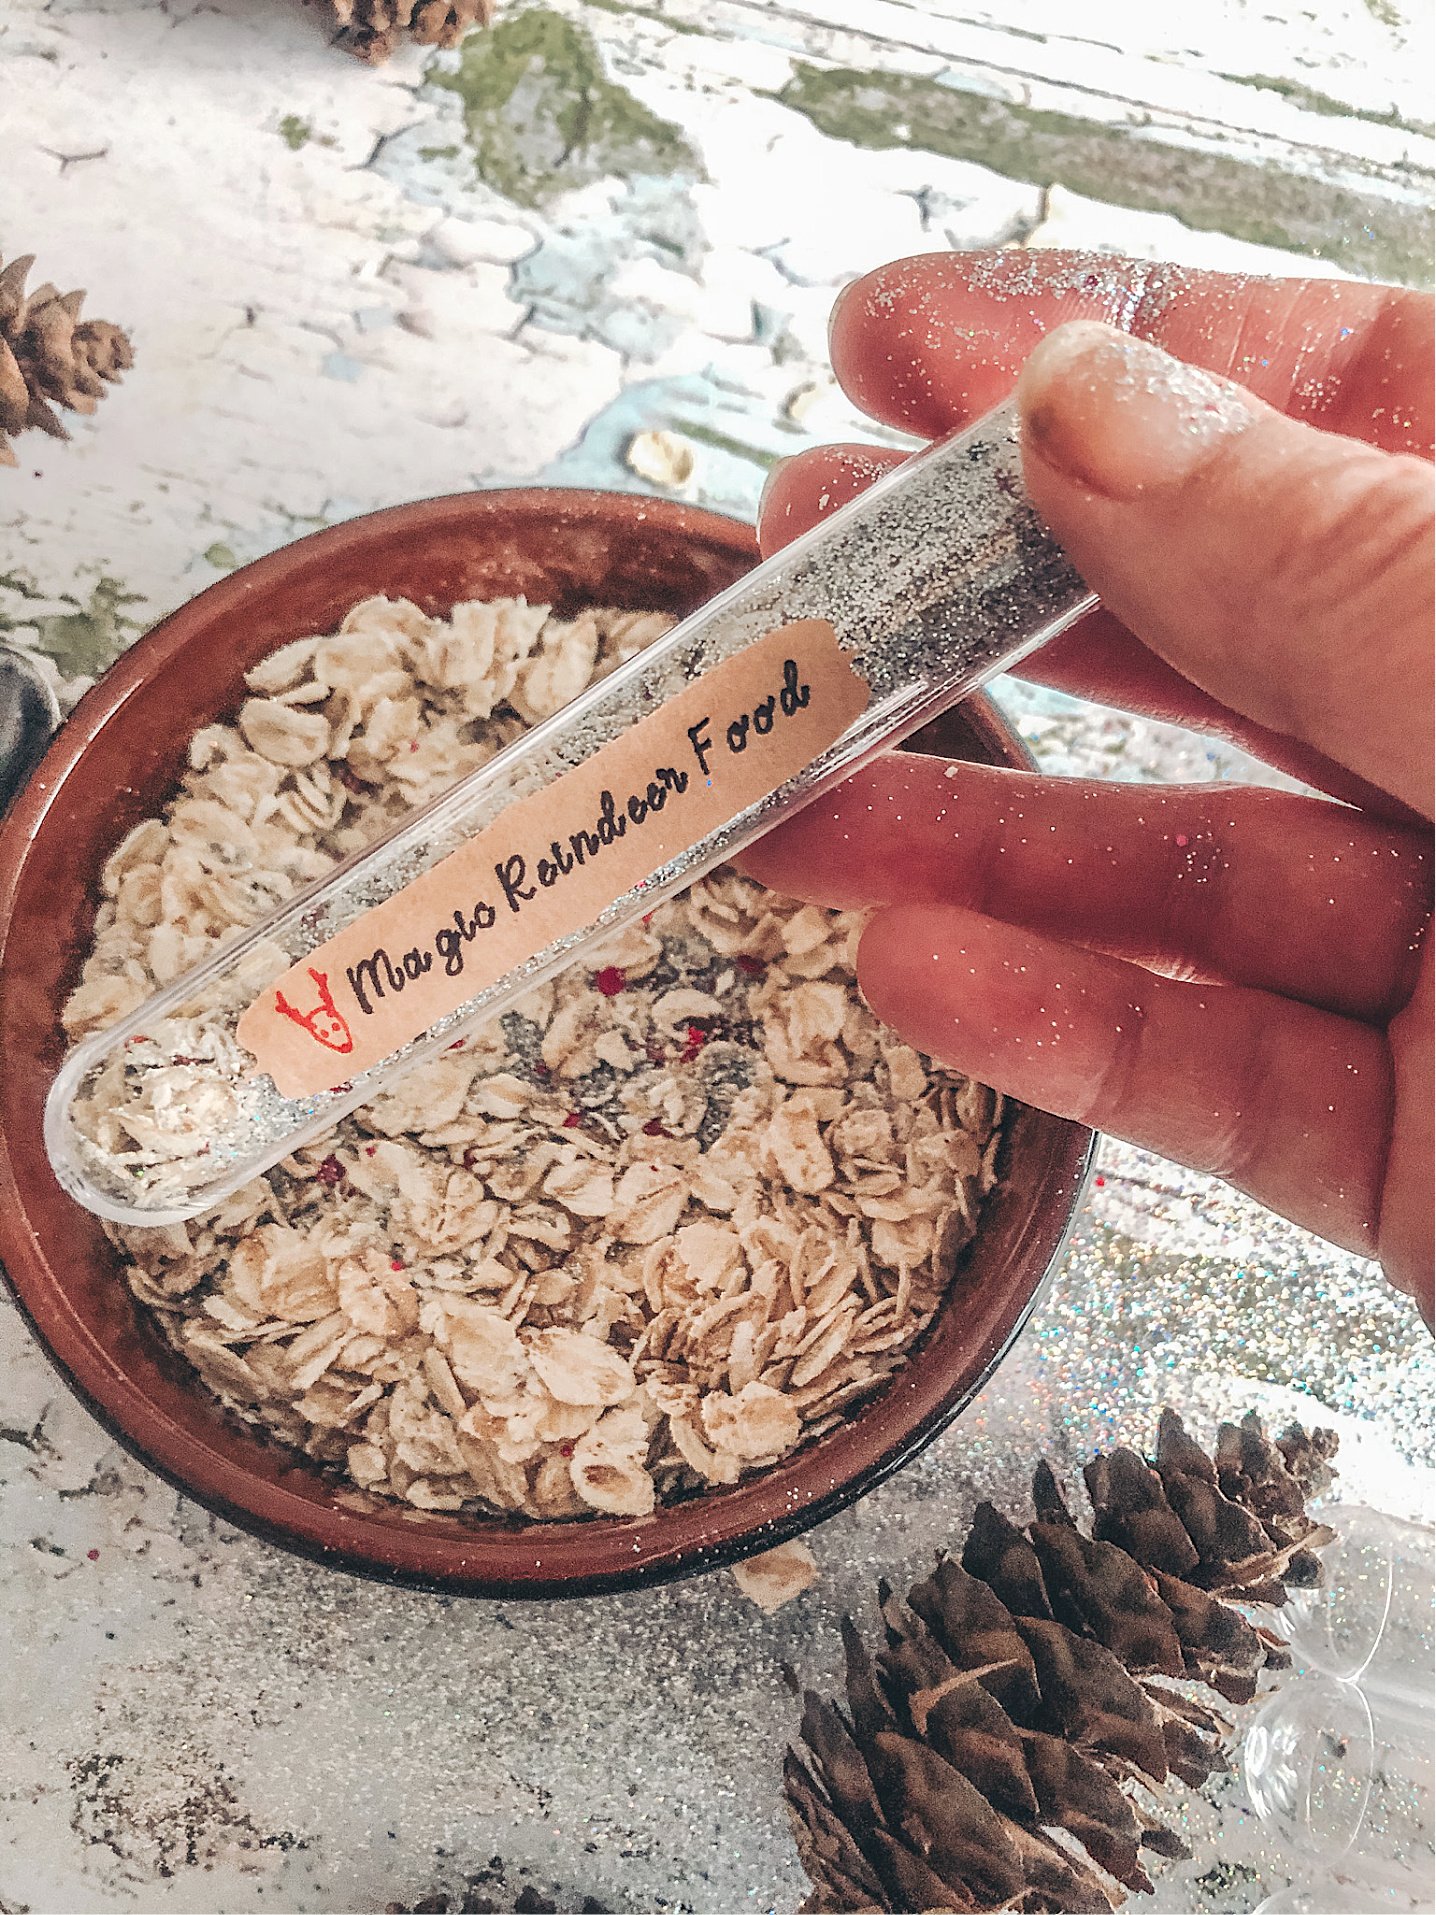 Now fill your tubes with your magic oat and glitter mix